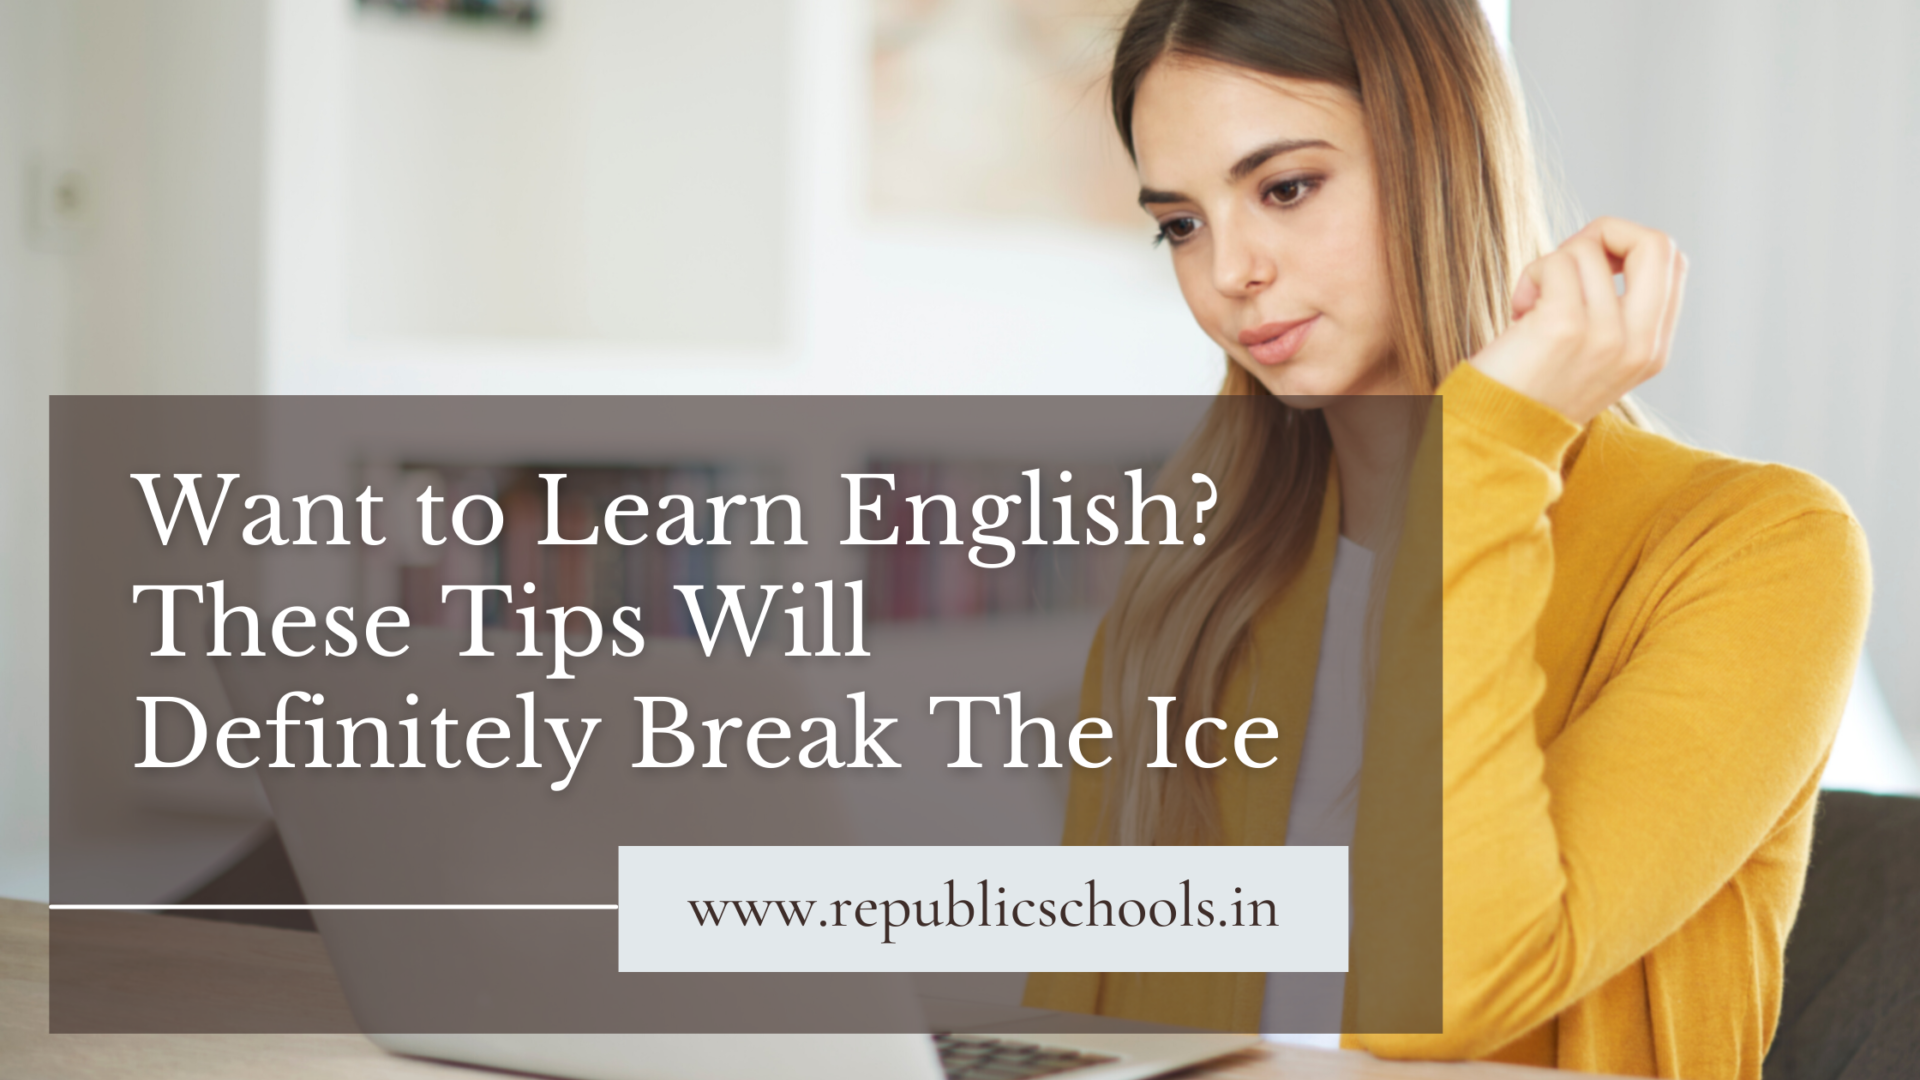 Want to Learn English? These Tips Will Definitely Break The Ice